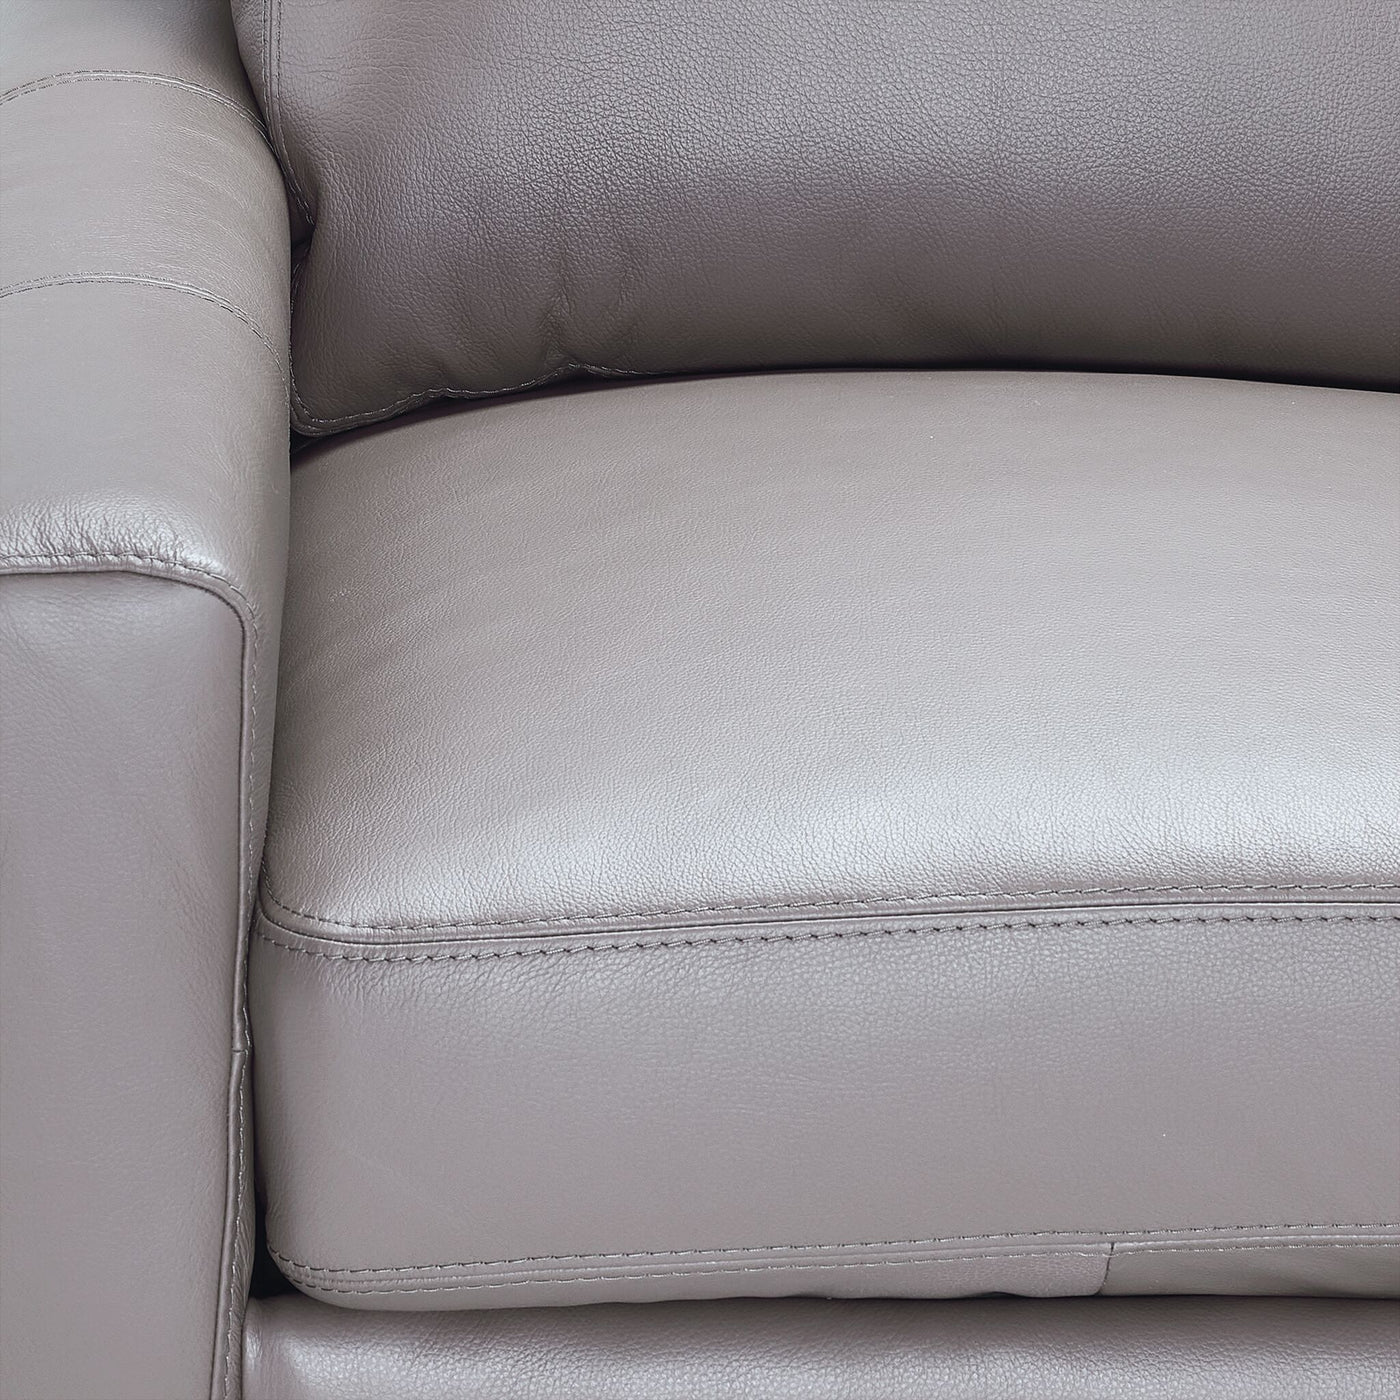 Chito Leather Loveseat - Cloud Grey